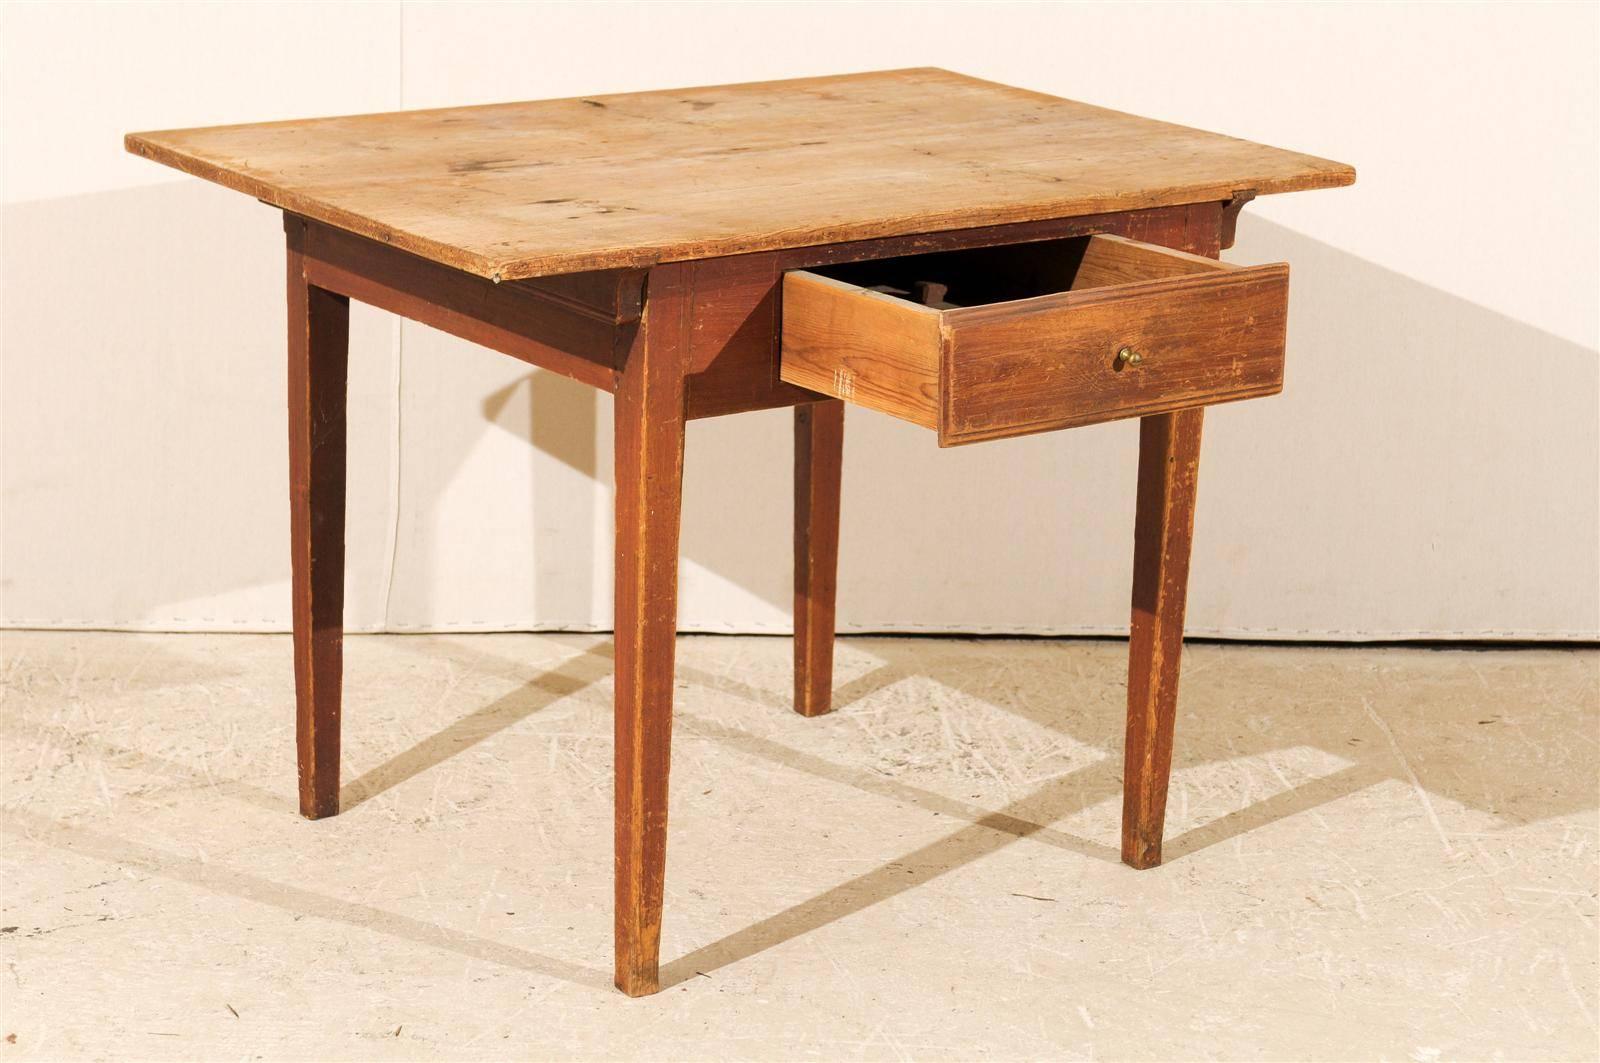 Swedish Single-Drawer Wooden Table, Clean and Simple Lines, Mid-19th Century For Sale 1